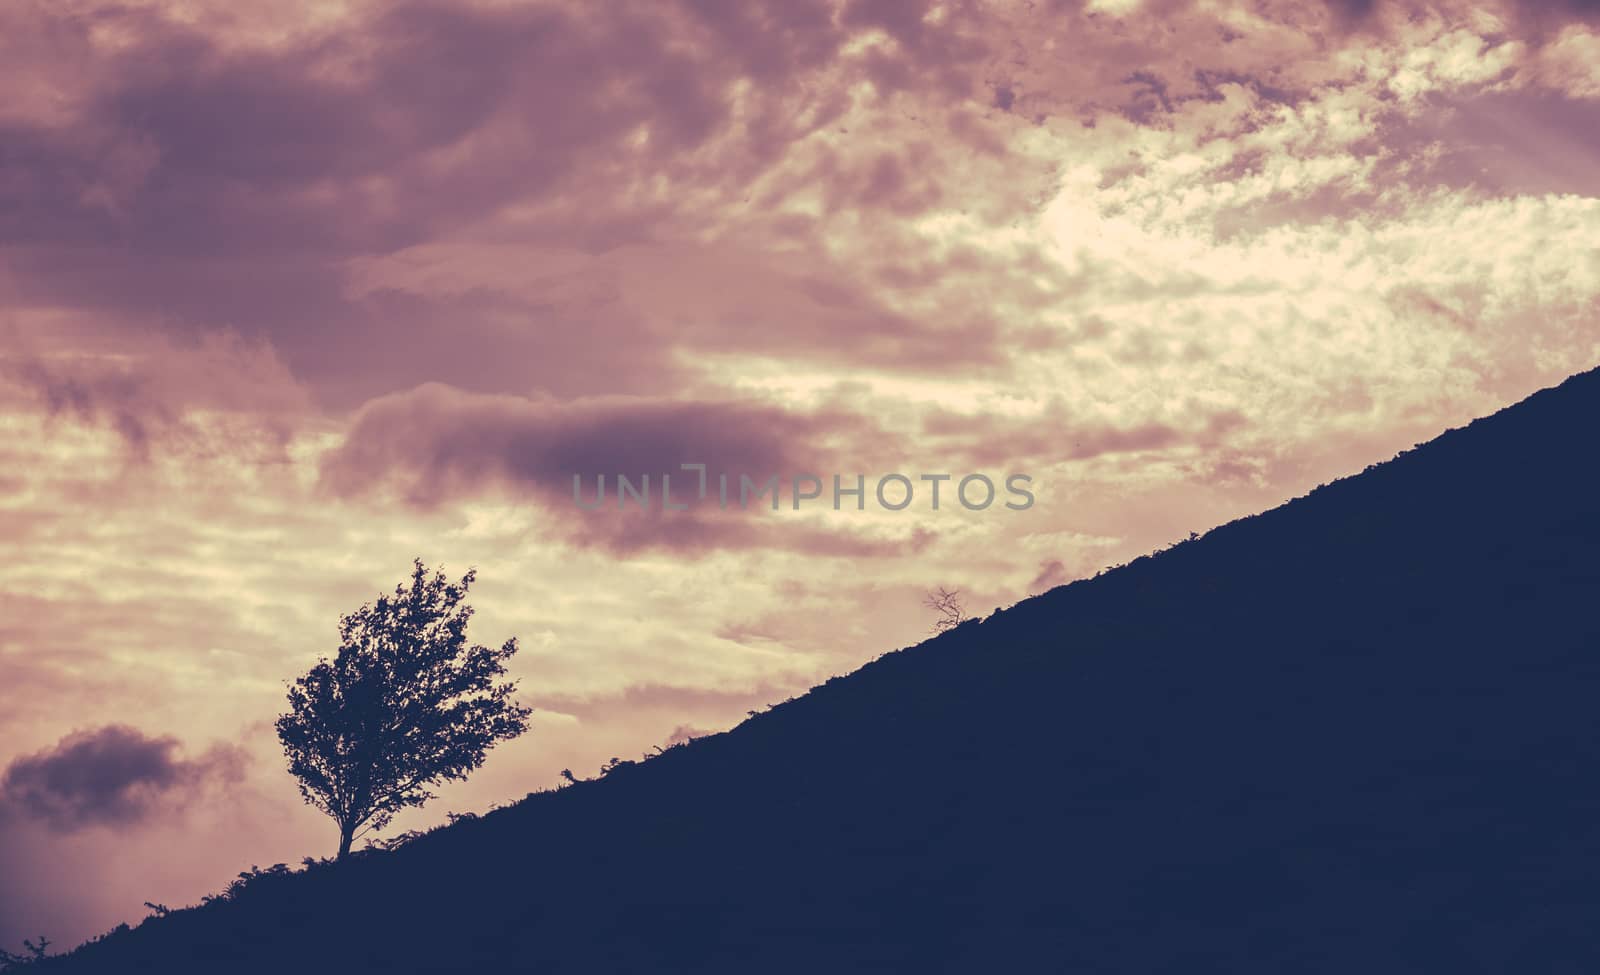 Silhouette Of A Lone Tree On A Hill Against A Sunset